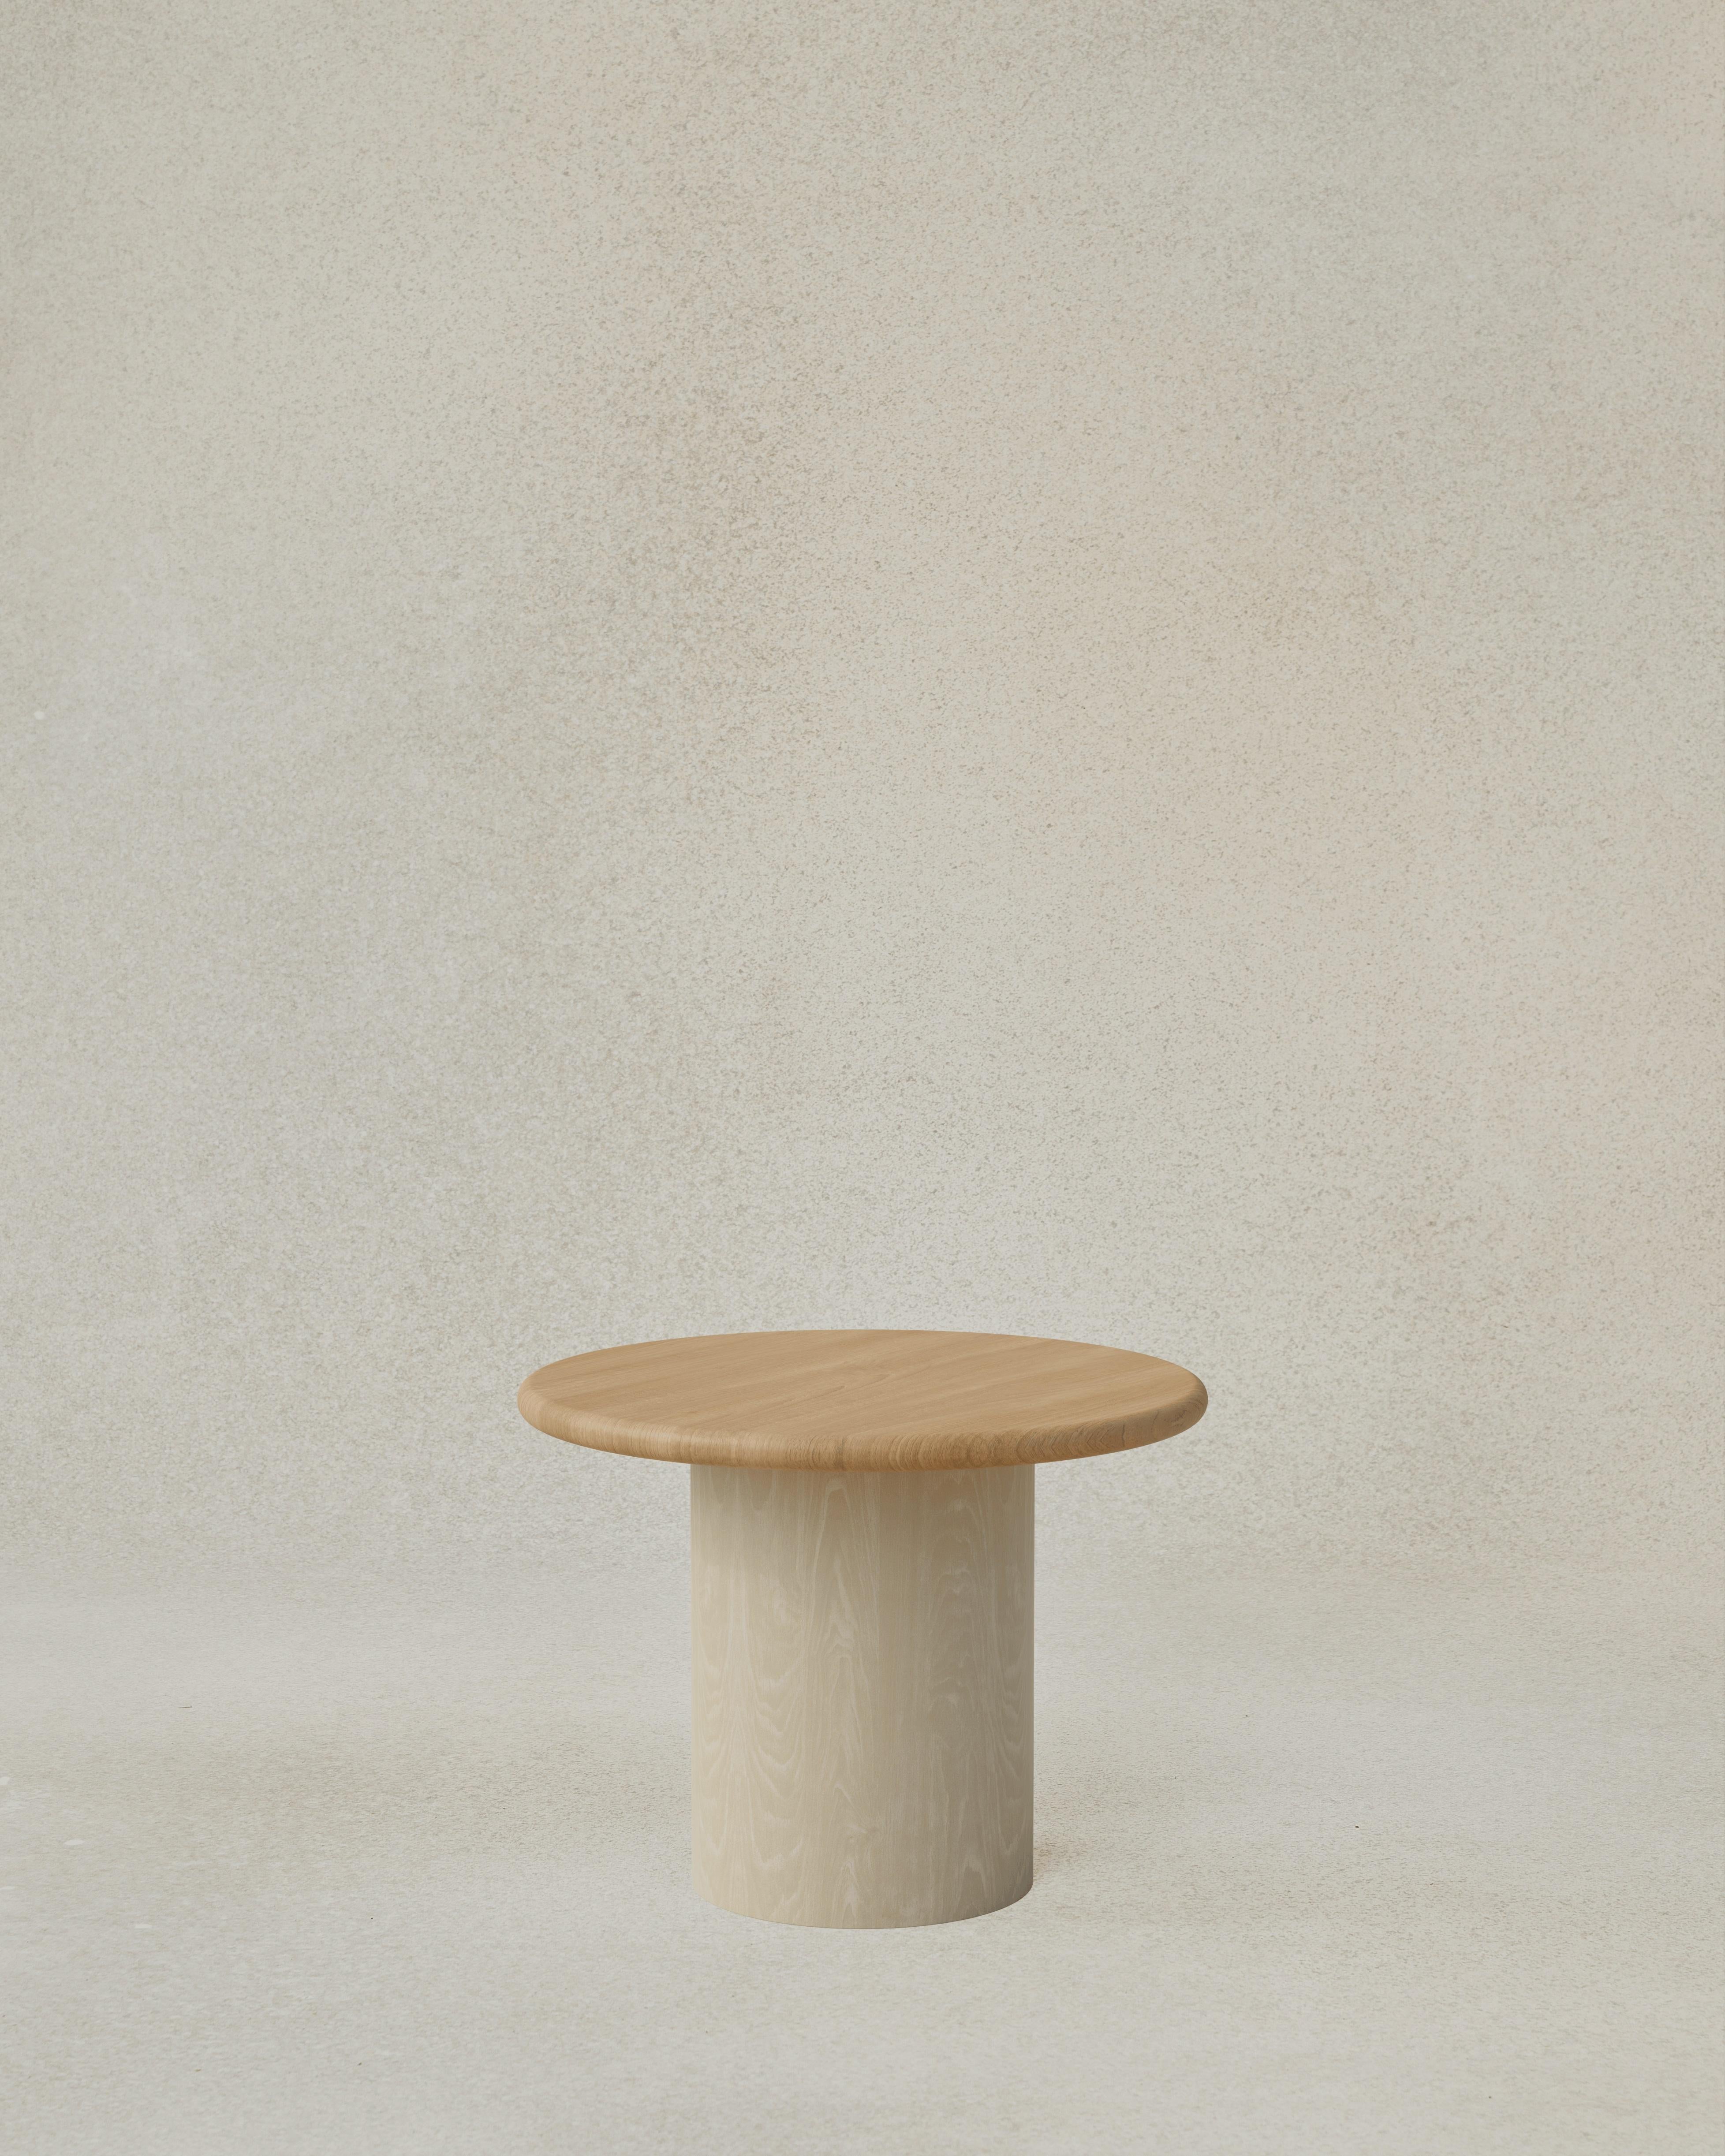 The raindrop 500 is the largest Side Table we offer in the series can be paired with a 300 or 1000, or both! Now available in a range of finishes to suit any interior or style. The raindrops nestle together to form a cascading series of tables in